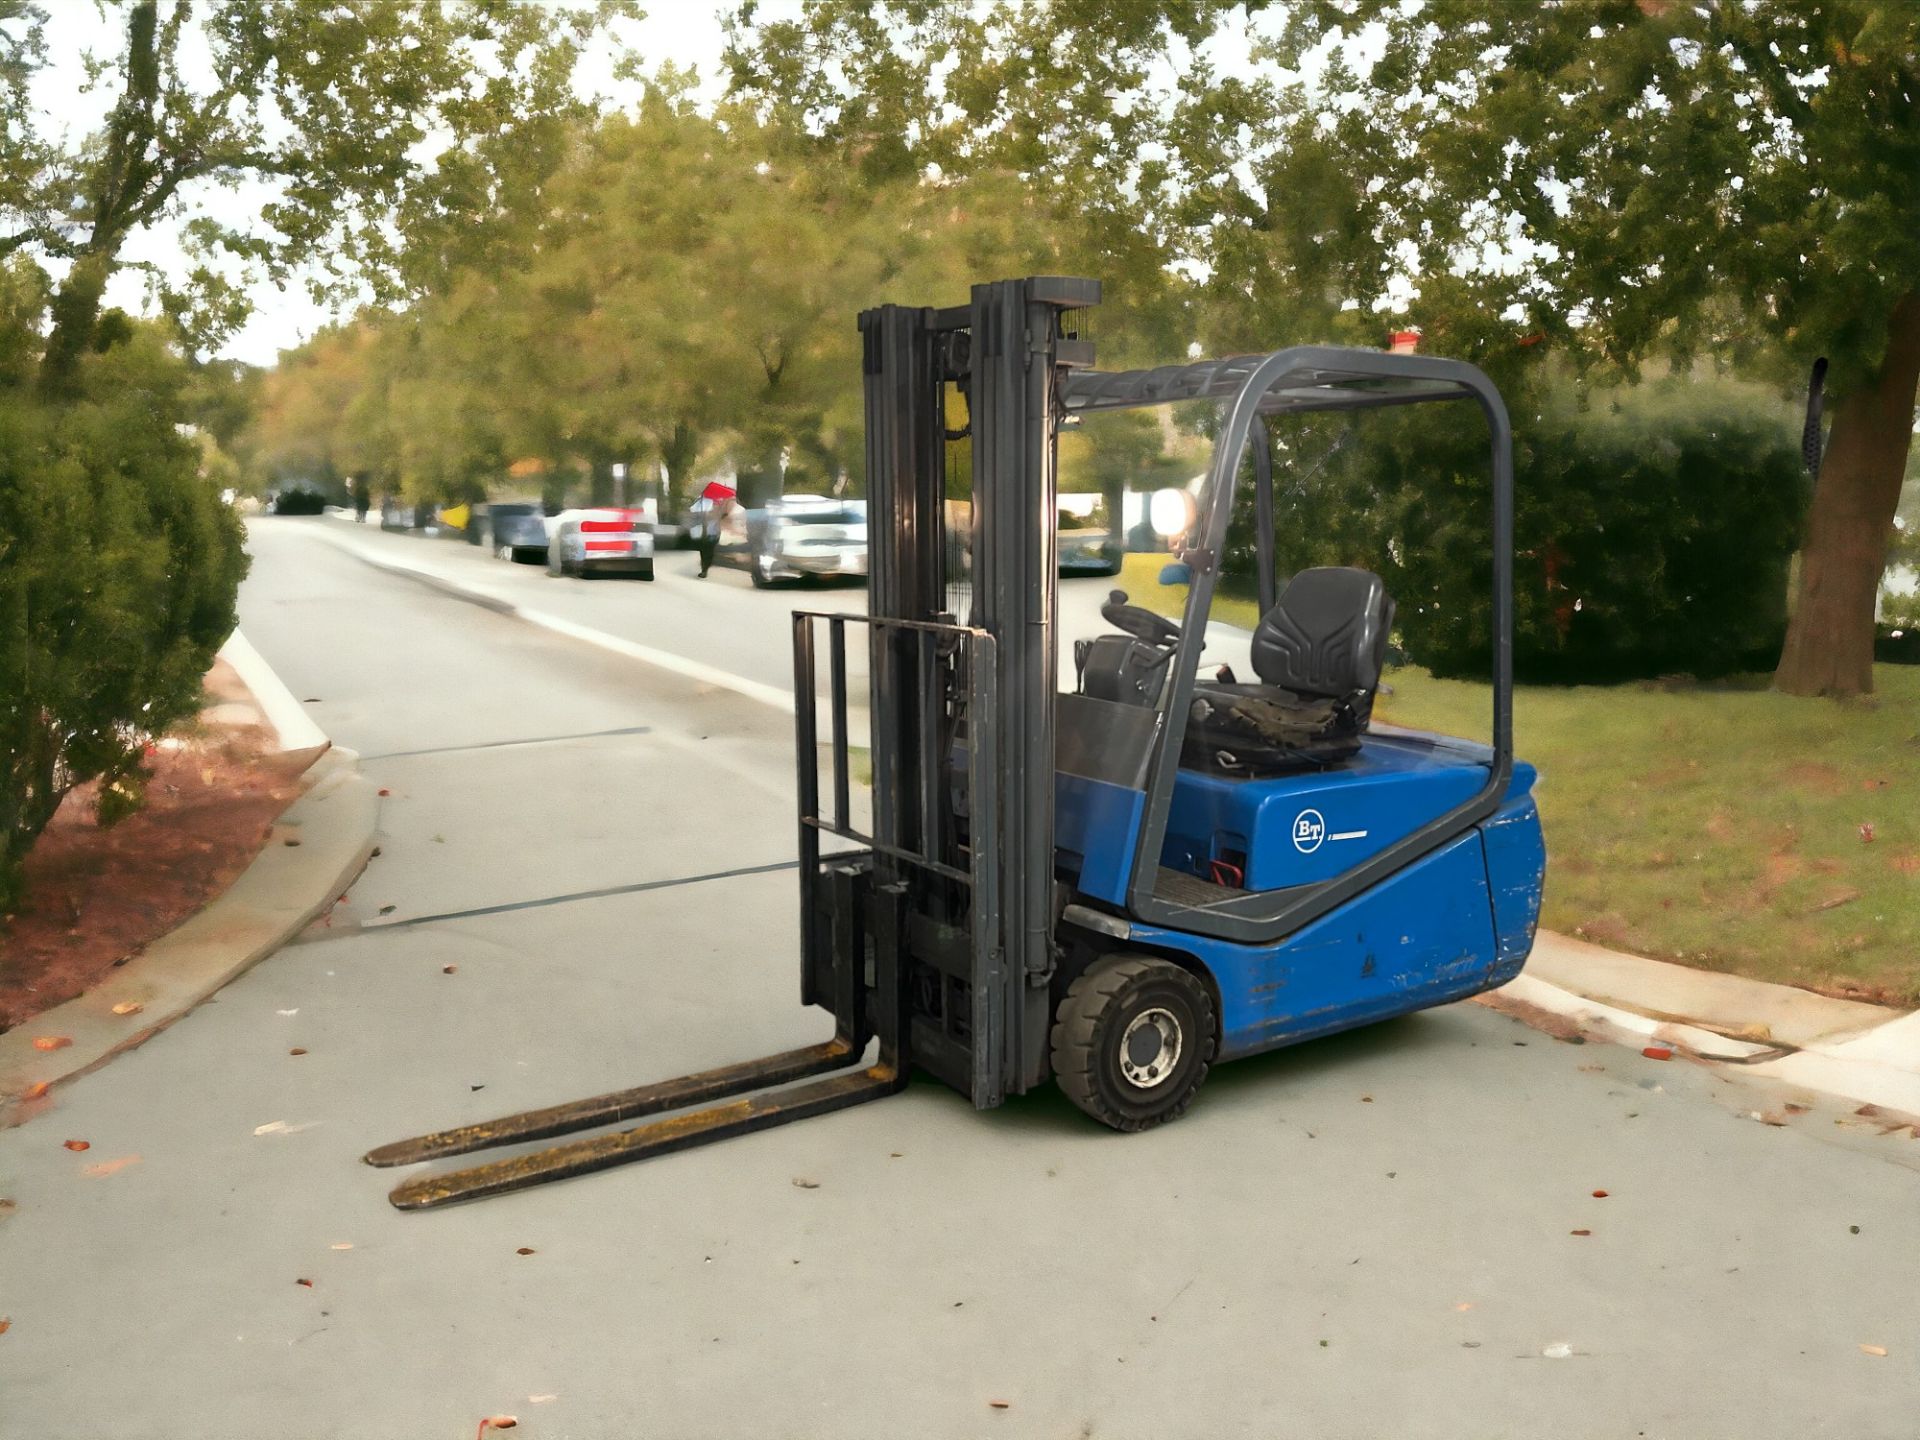 BT ELECTRIC 3-WHEEL FORKLIFT - MODEL CBE1.6T (2002) **(INCLUDES CHARGER)** - Image 2 of 6